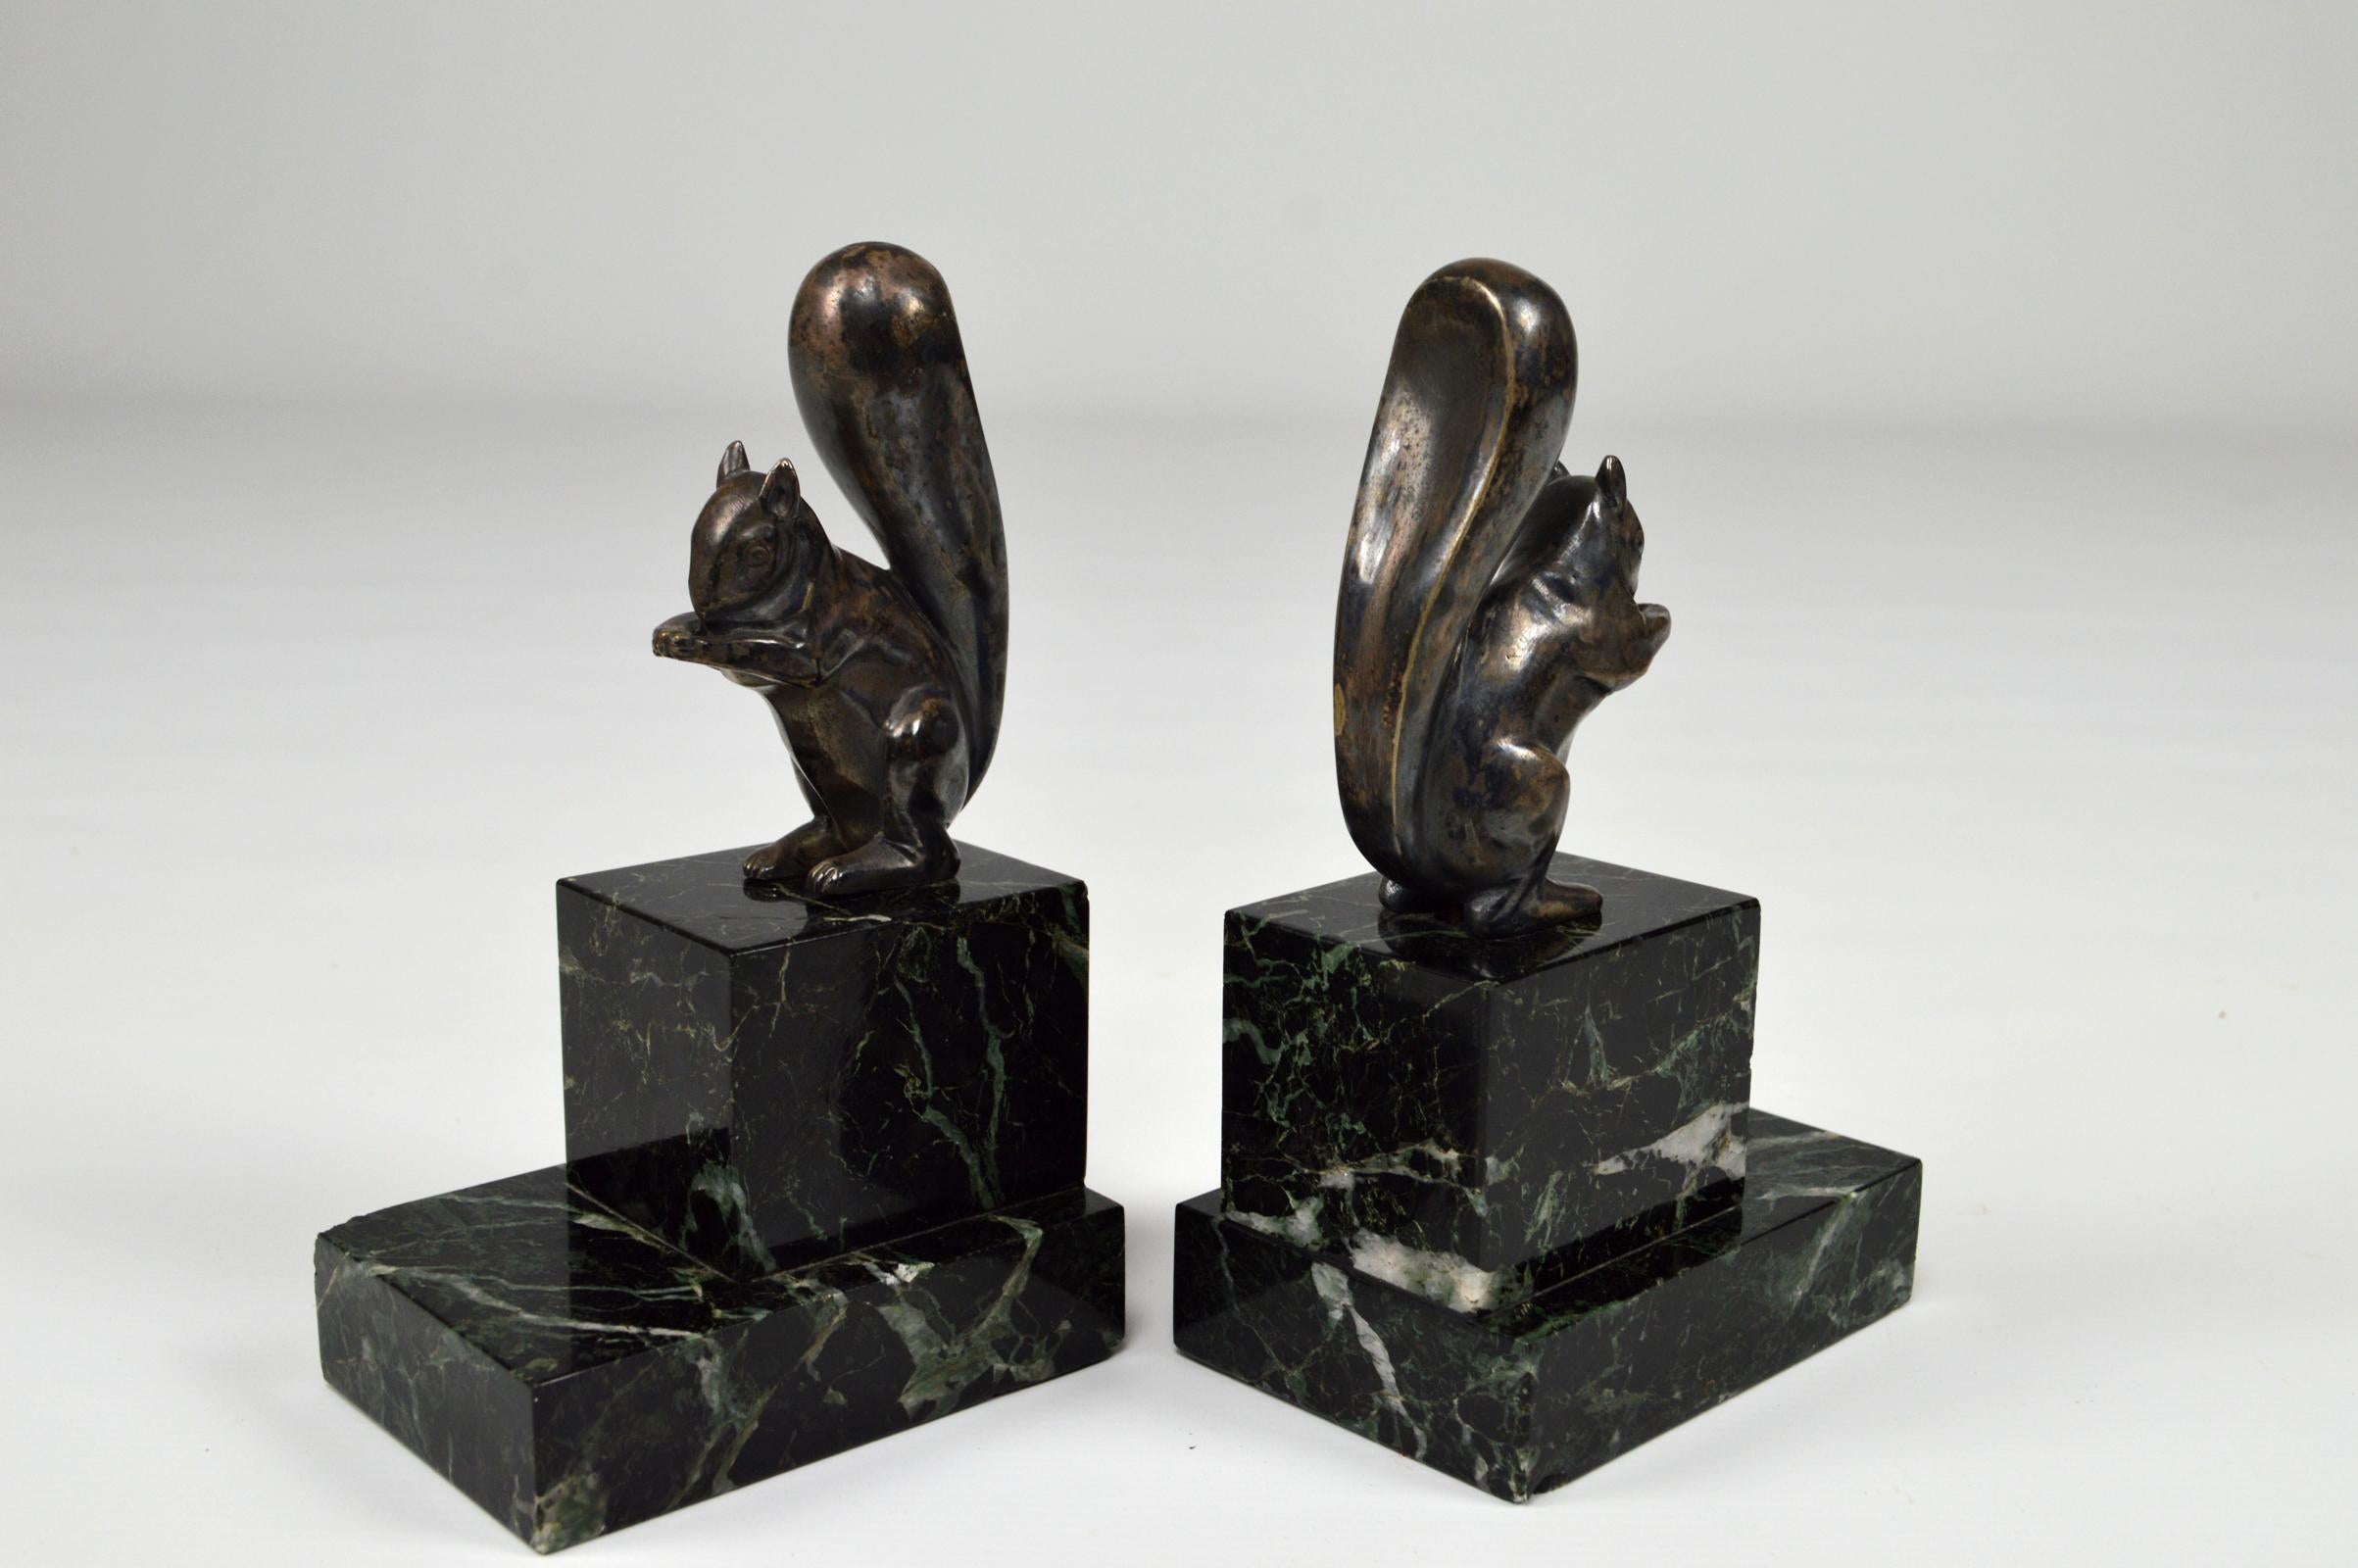 Pair of bookends squirrels in silvered bronze on marble top.
Numbered and signed: 